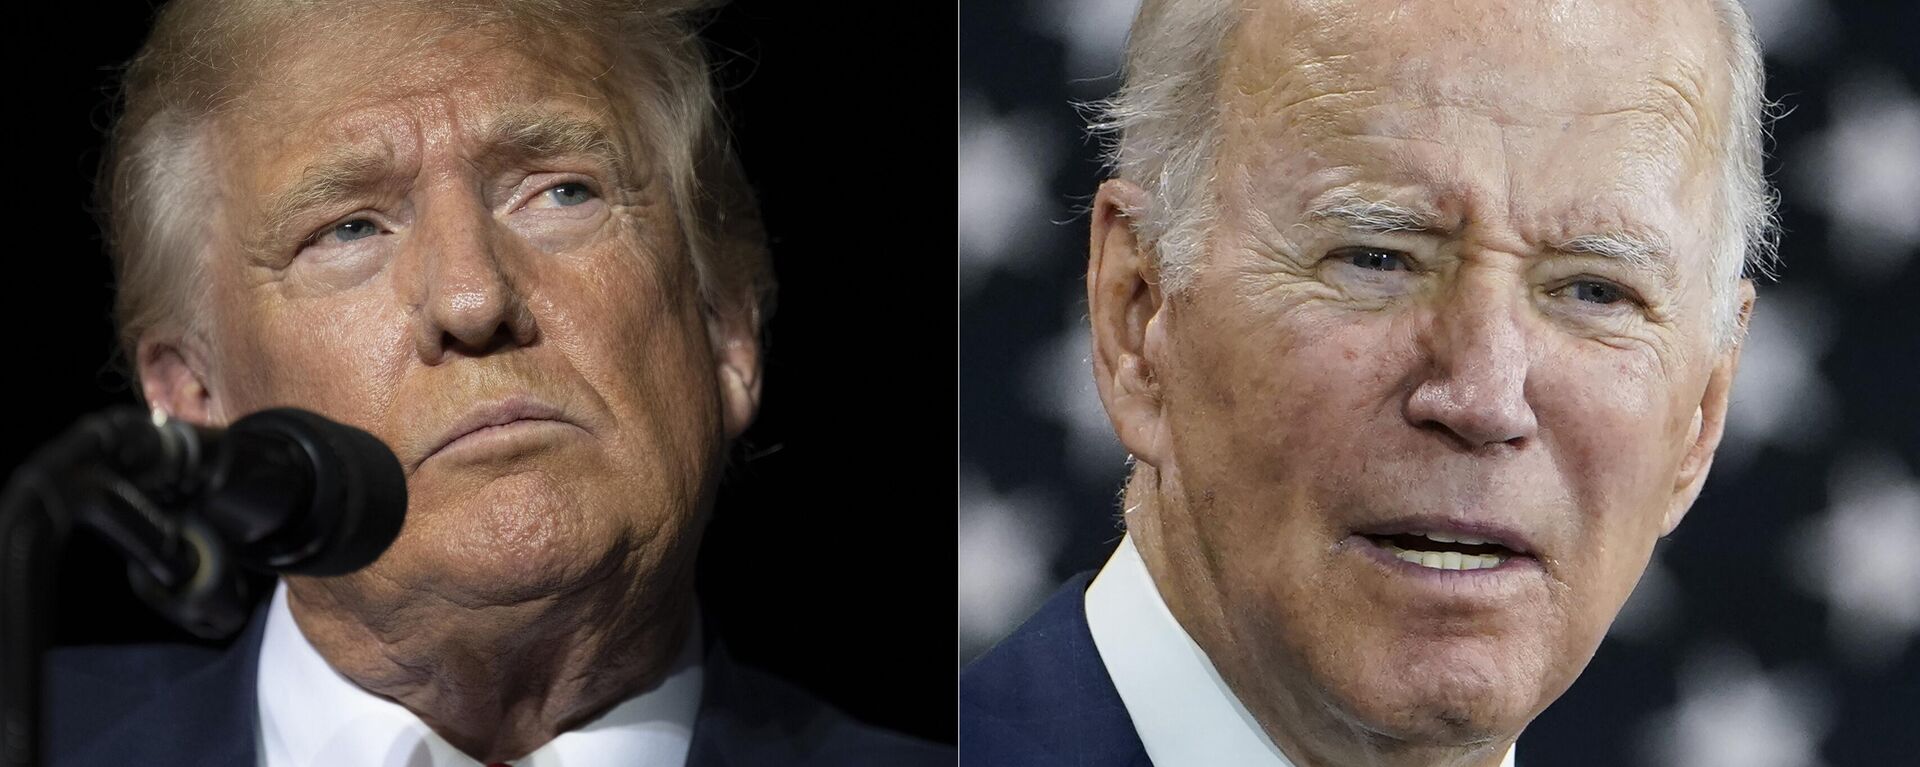 This combination of photos shows former President Donald Trump, left, and President Joe Biden, right. Biden and Trump are preparing for a possible rematch in 2024. But a new poll finds a notable lack of enthusiasm within the parties for either man as his party's leader, and a clear opening for new leadership. The poll from The Associated Press-NORC Center for Public Affairs Research finds a third of both Democrats and Republicans are unsure of who they want leading their party.  - Sputnik International, 1920, 20.07.2023